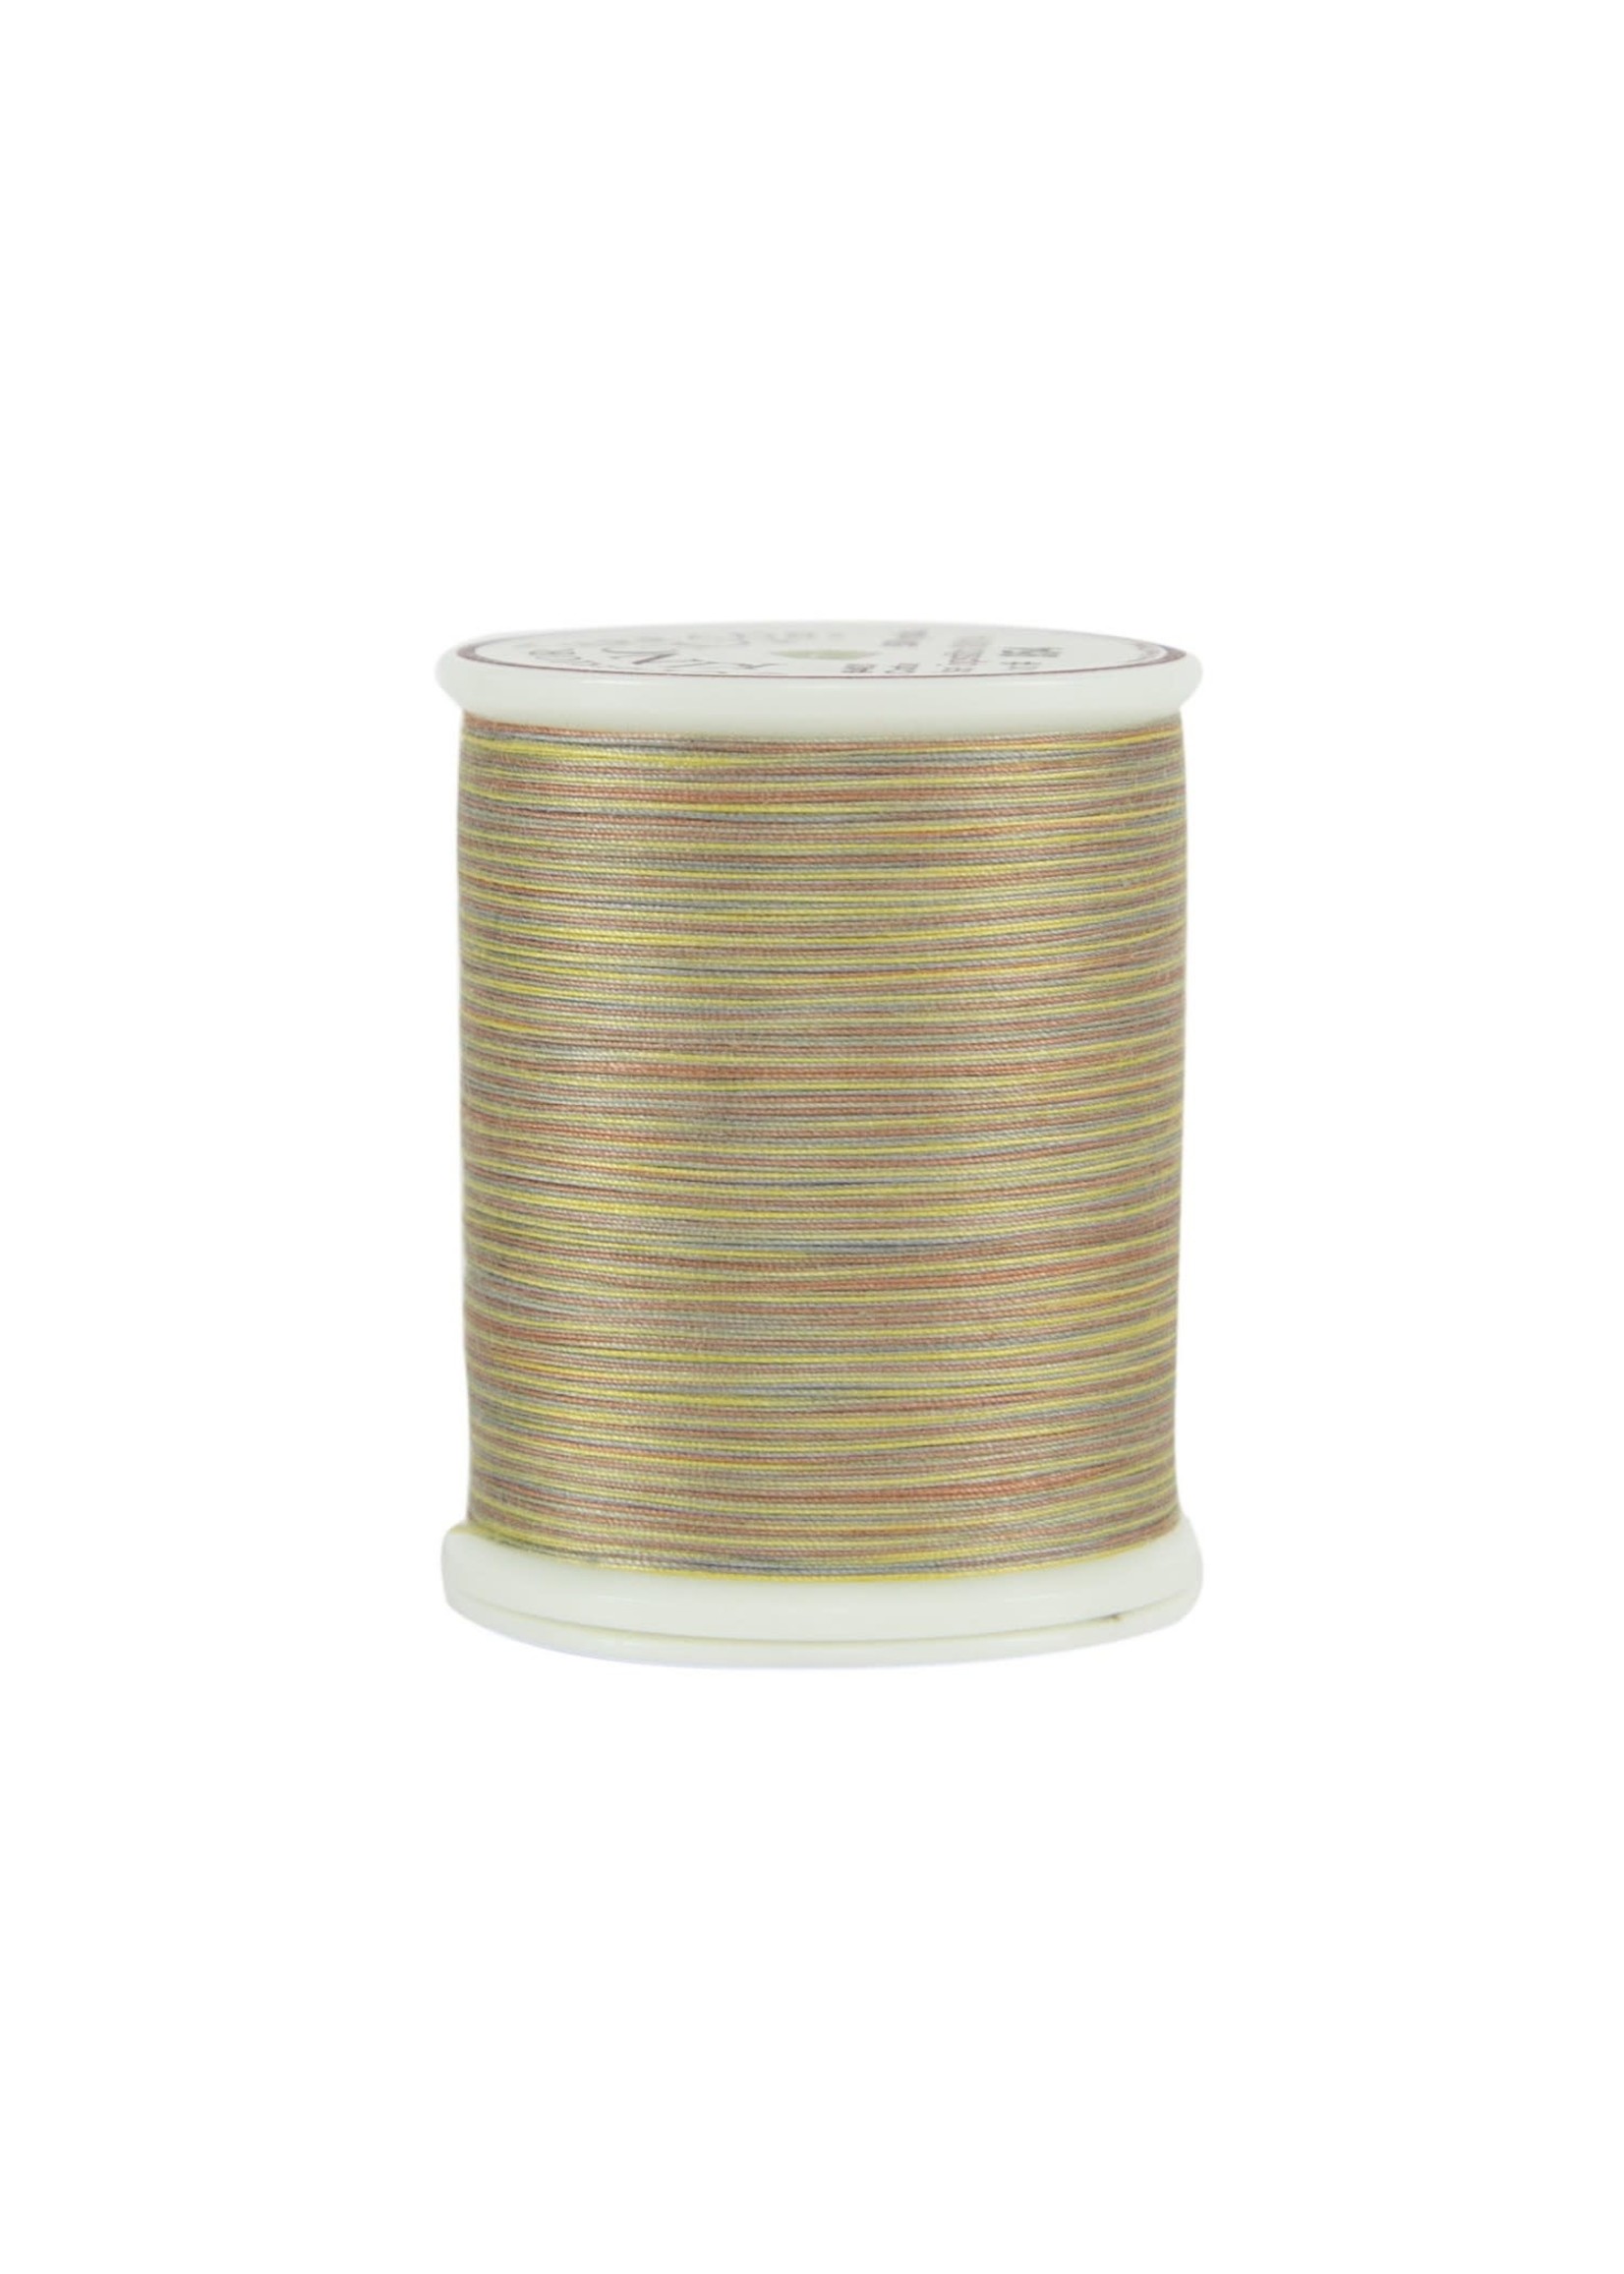 Superior Threads King Tut - #40 - 457 m - 0954 Shifting Sands